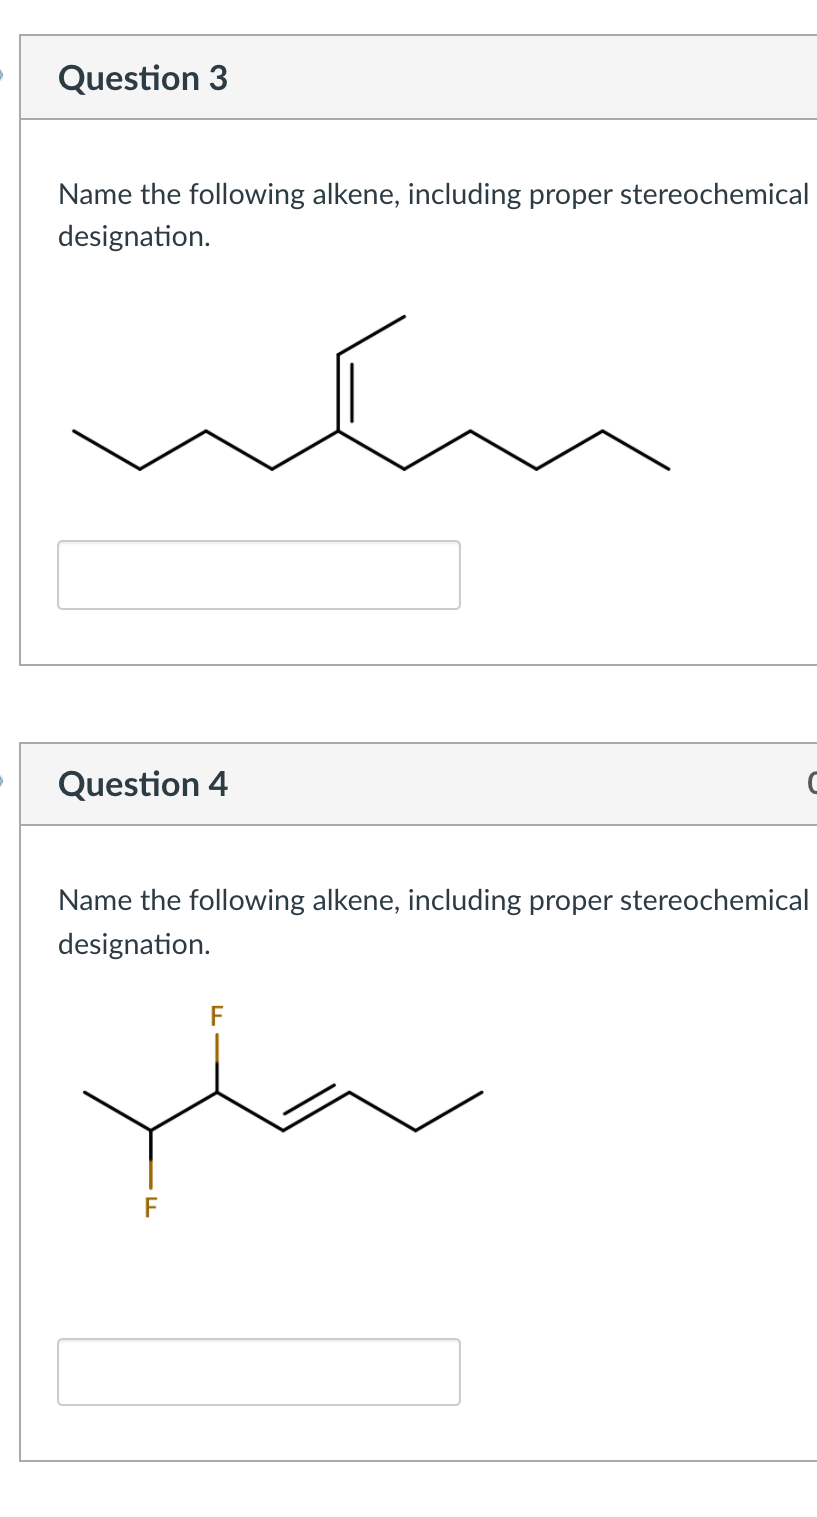 Question 3
Name the following alkene, including proper stereochemical
designation.
Question 4
Name the following alkene, including proper stereochemical
designation.
F
F
